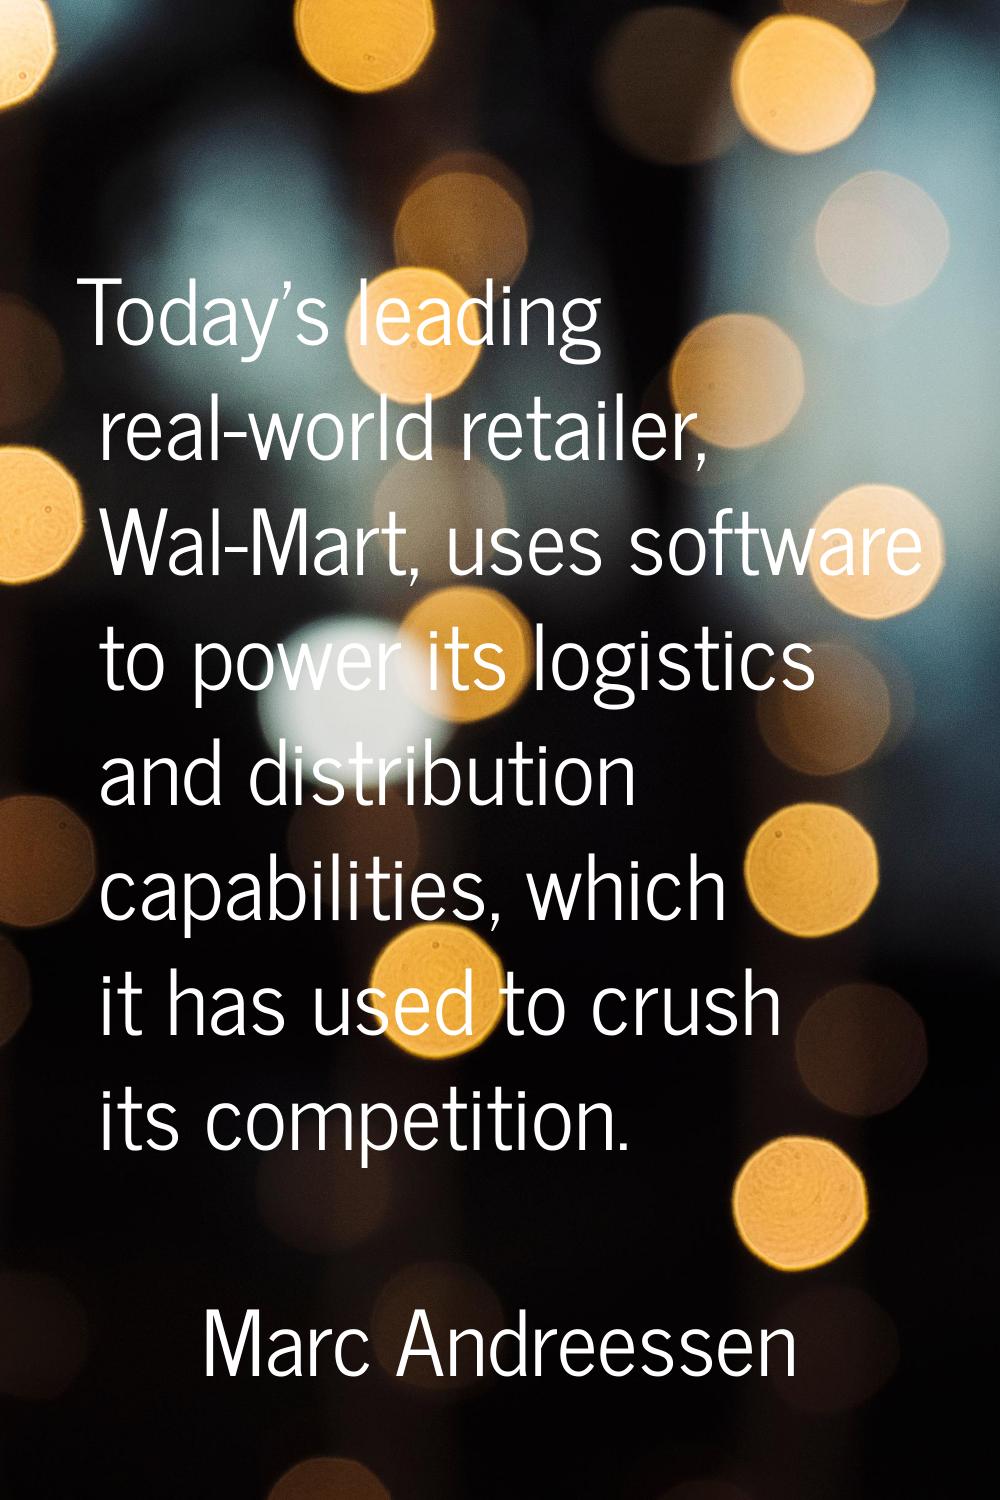 Today's leading real-world retailer, Wal-Mart, uses software to power its logistics and distributio